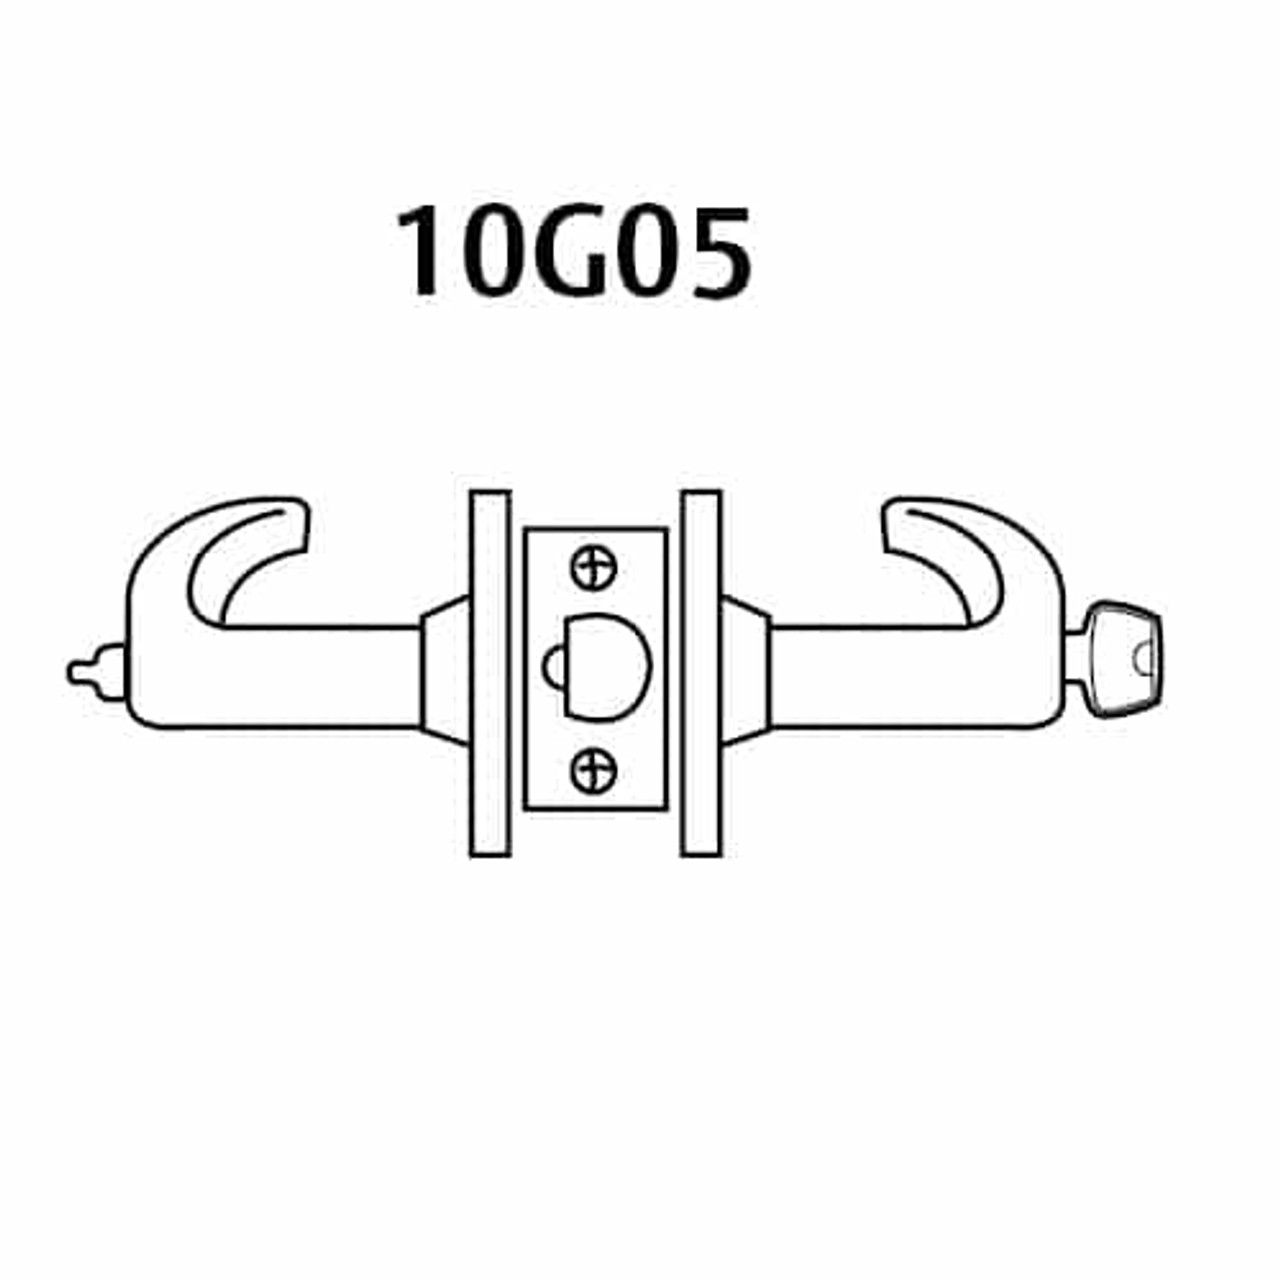 2870-10G05-LP-10 Sargent 10 Line Cylindrical Entry/Office Locks with P Lever Design and L Rose Prepped for SFIC in Dull Bronze